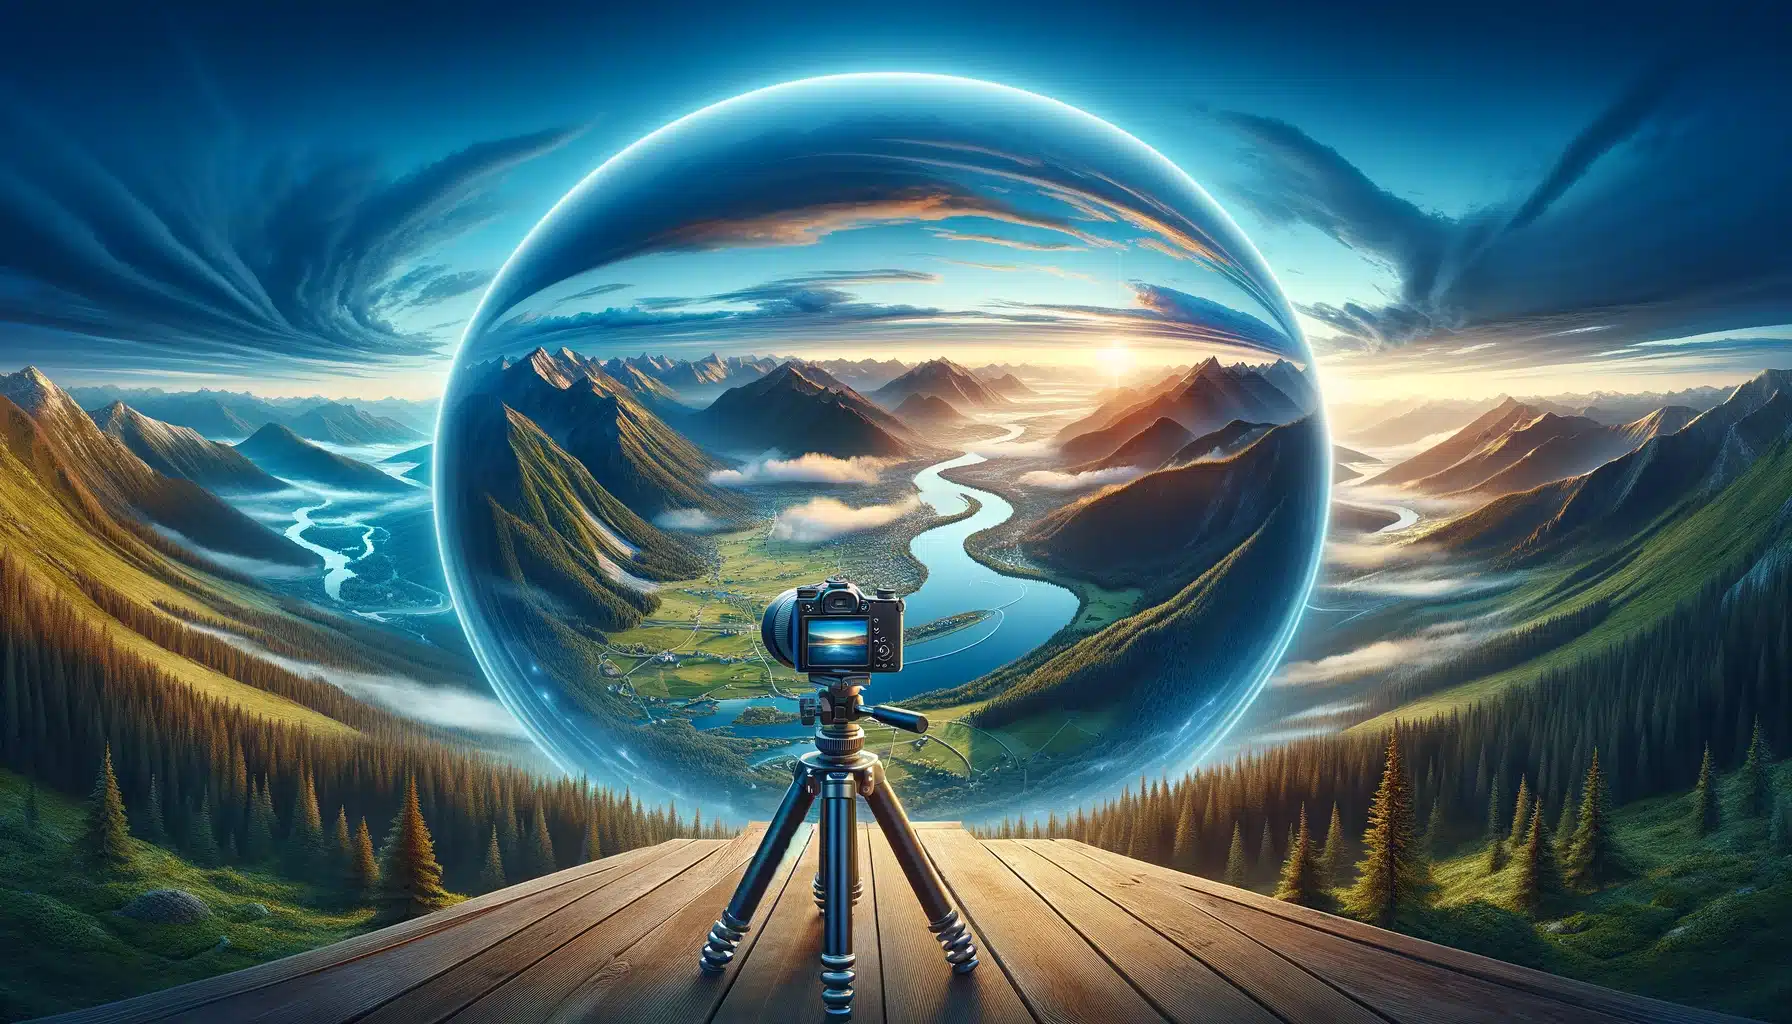 A detailed camera on a tripod captures a 360-degree panoramic view of a landscape with mountains, rivers, and forests under a clear blue sky, illustrating the concept of 360 photography.